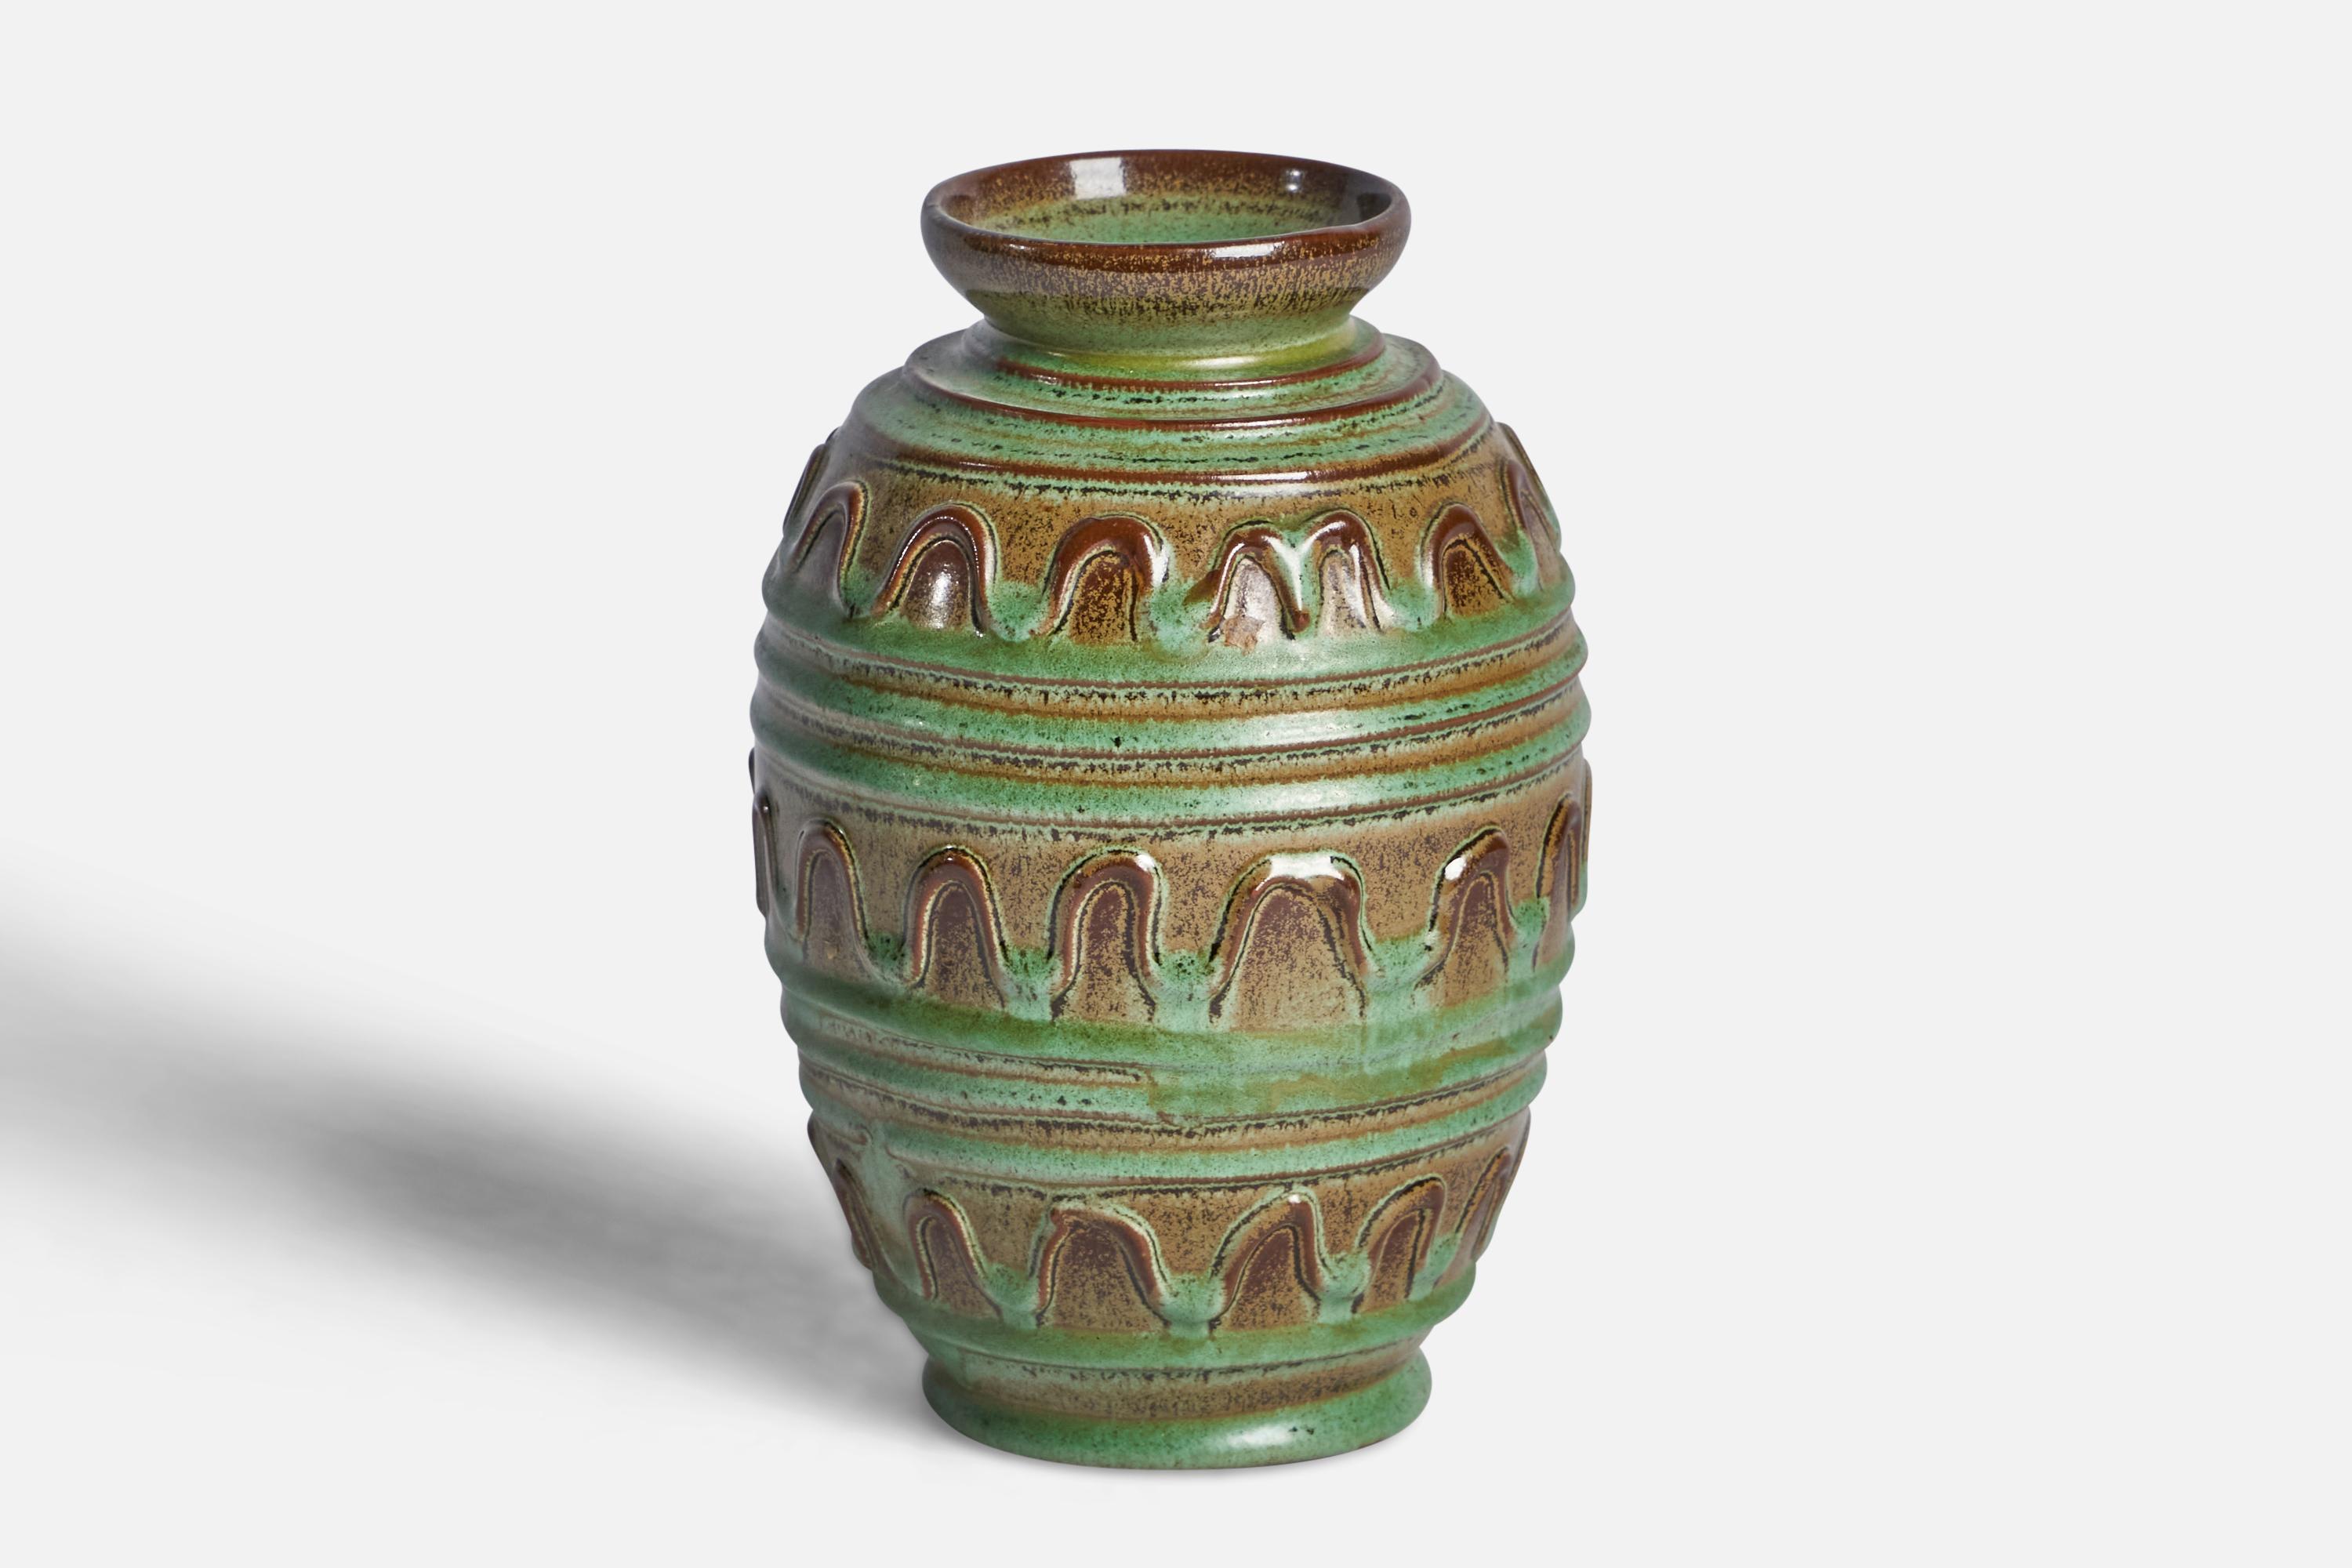 A green and brown-glazed earthenware vase designed by Erik Mornils and produced by Nittsjö, Sweden, c. 1930s.